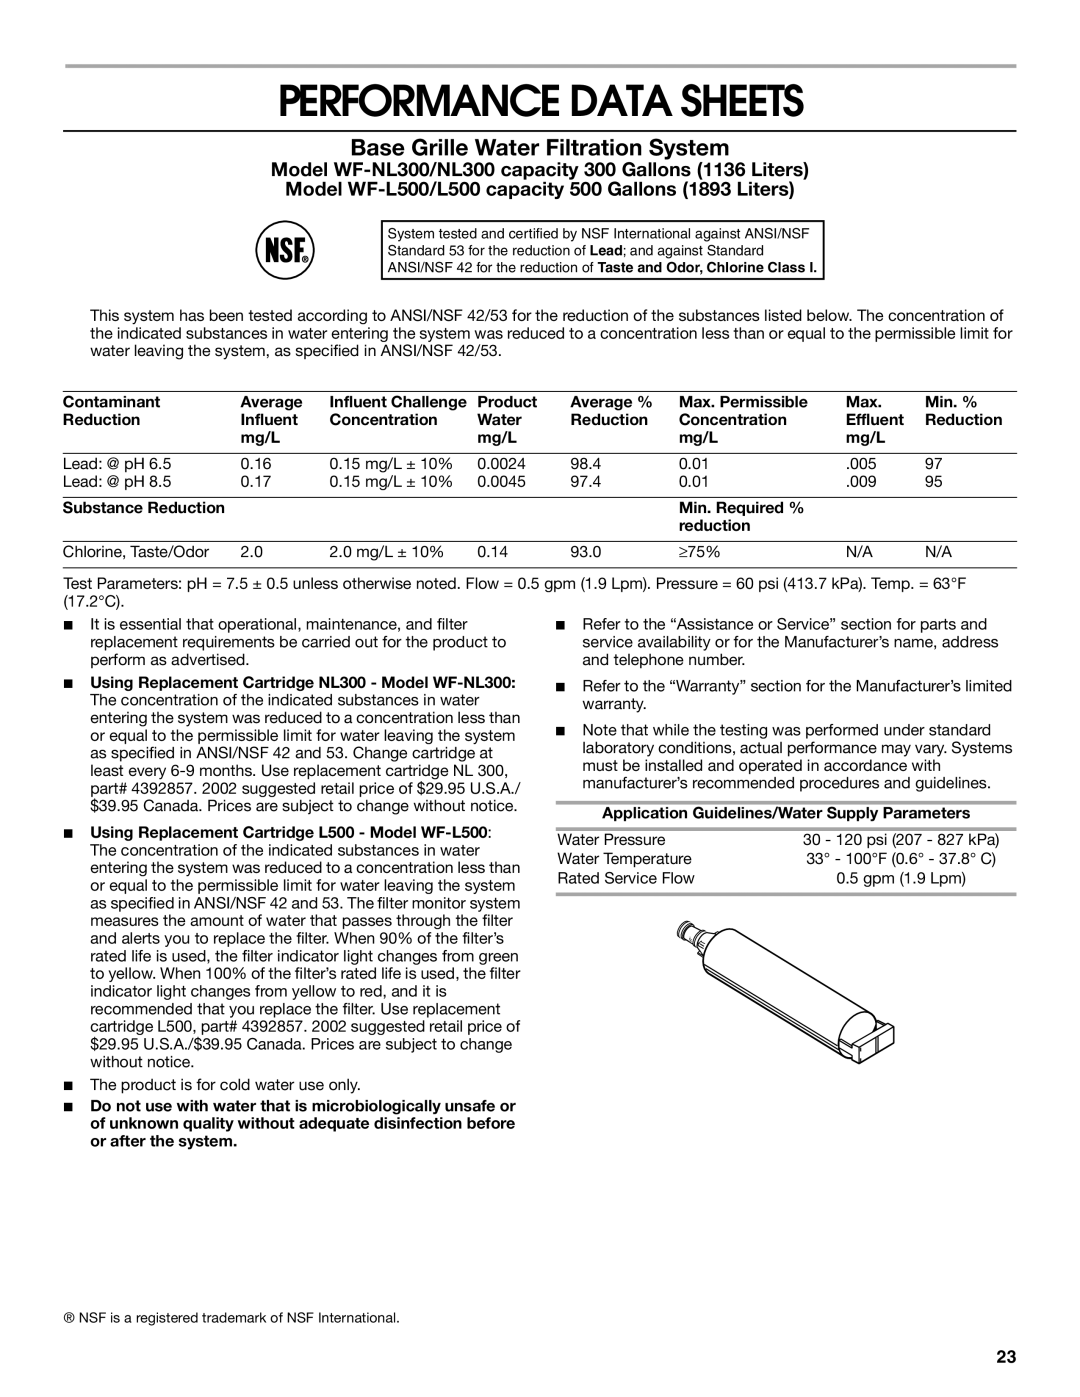 Whirlpool TS25AFXKQ00 manual Performance Data Sheets, Base Grille Water Filtration System 